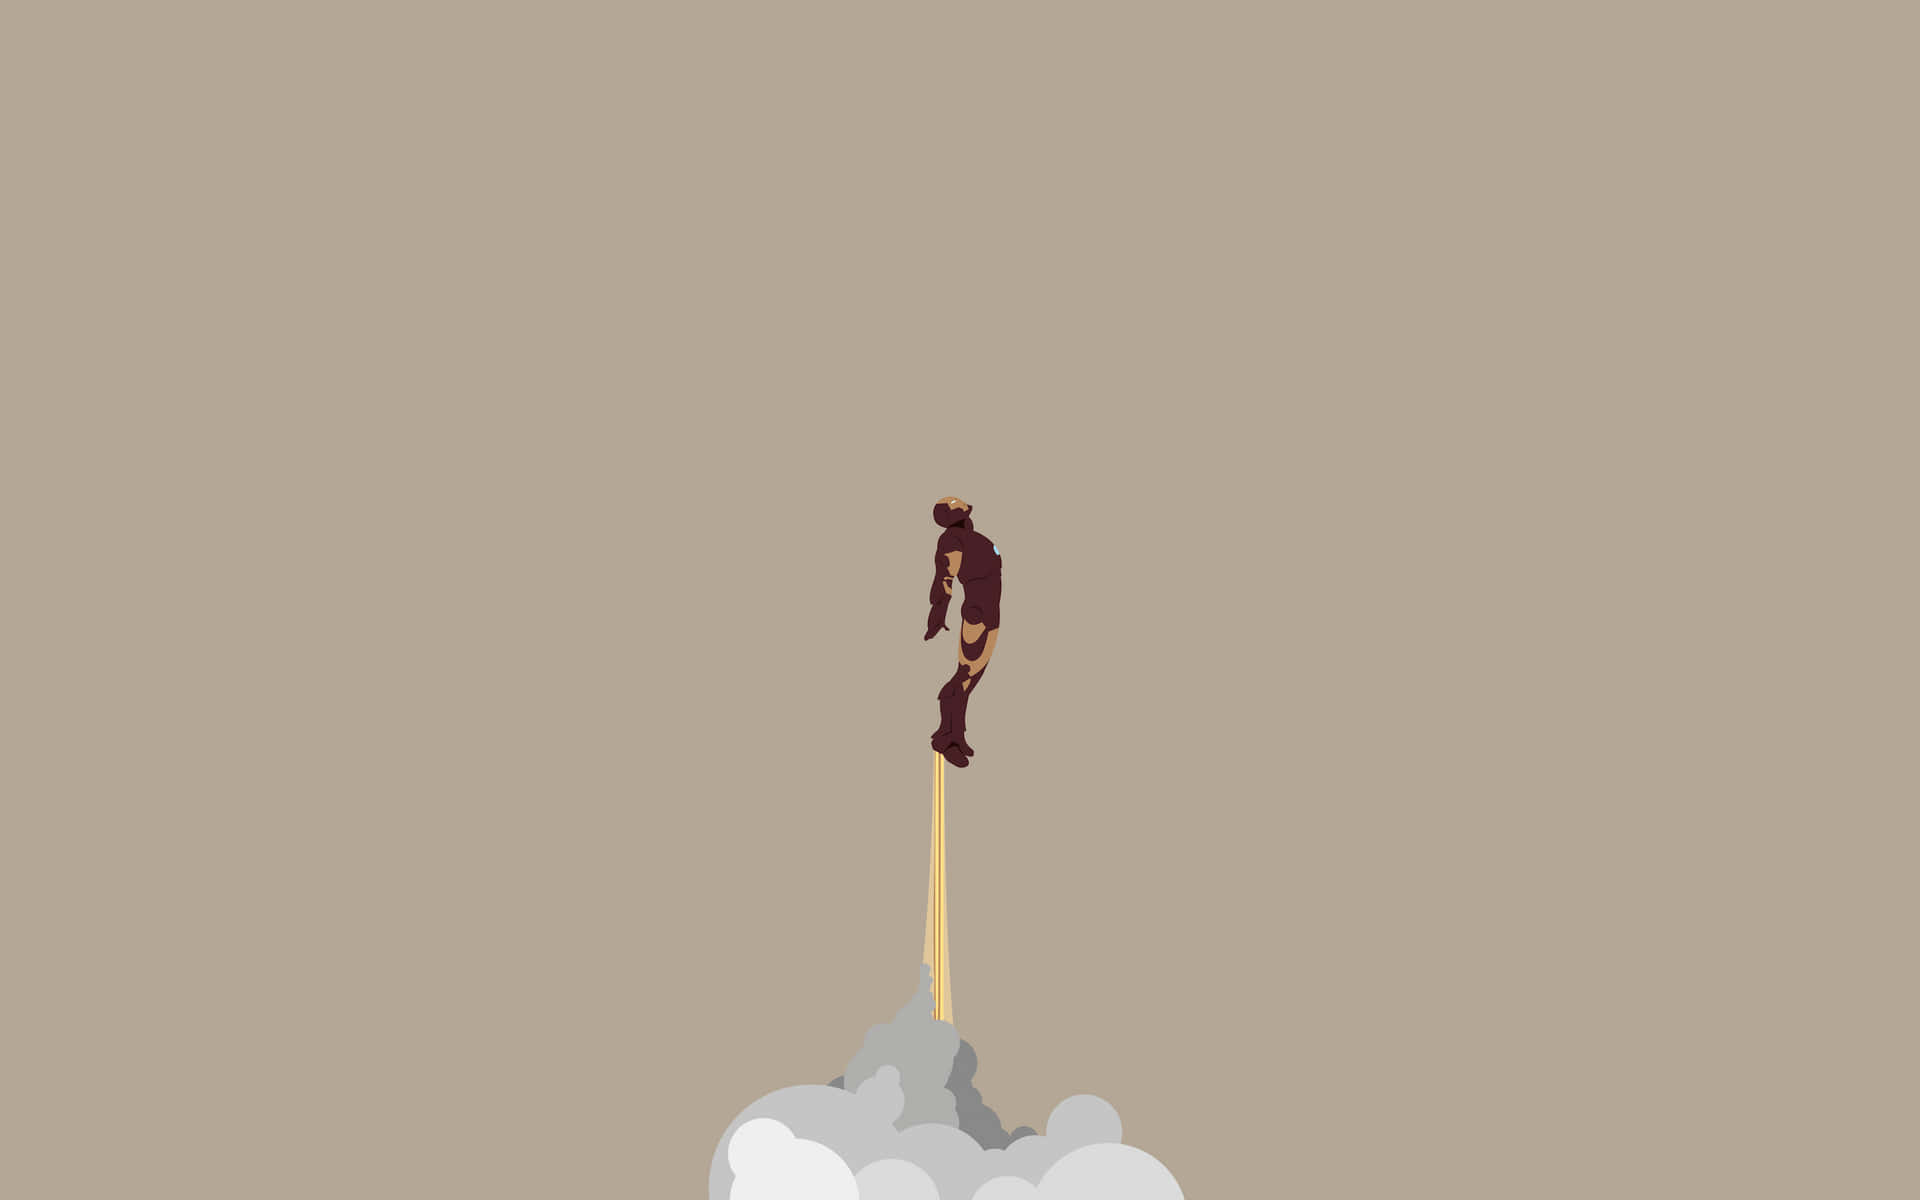 A Man Is Flying On A Stick In The Air Wallpaper